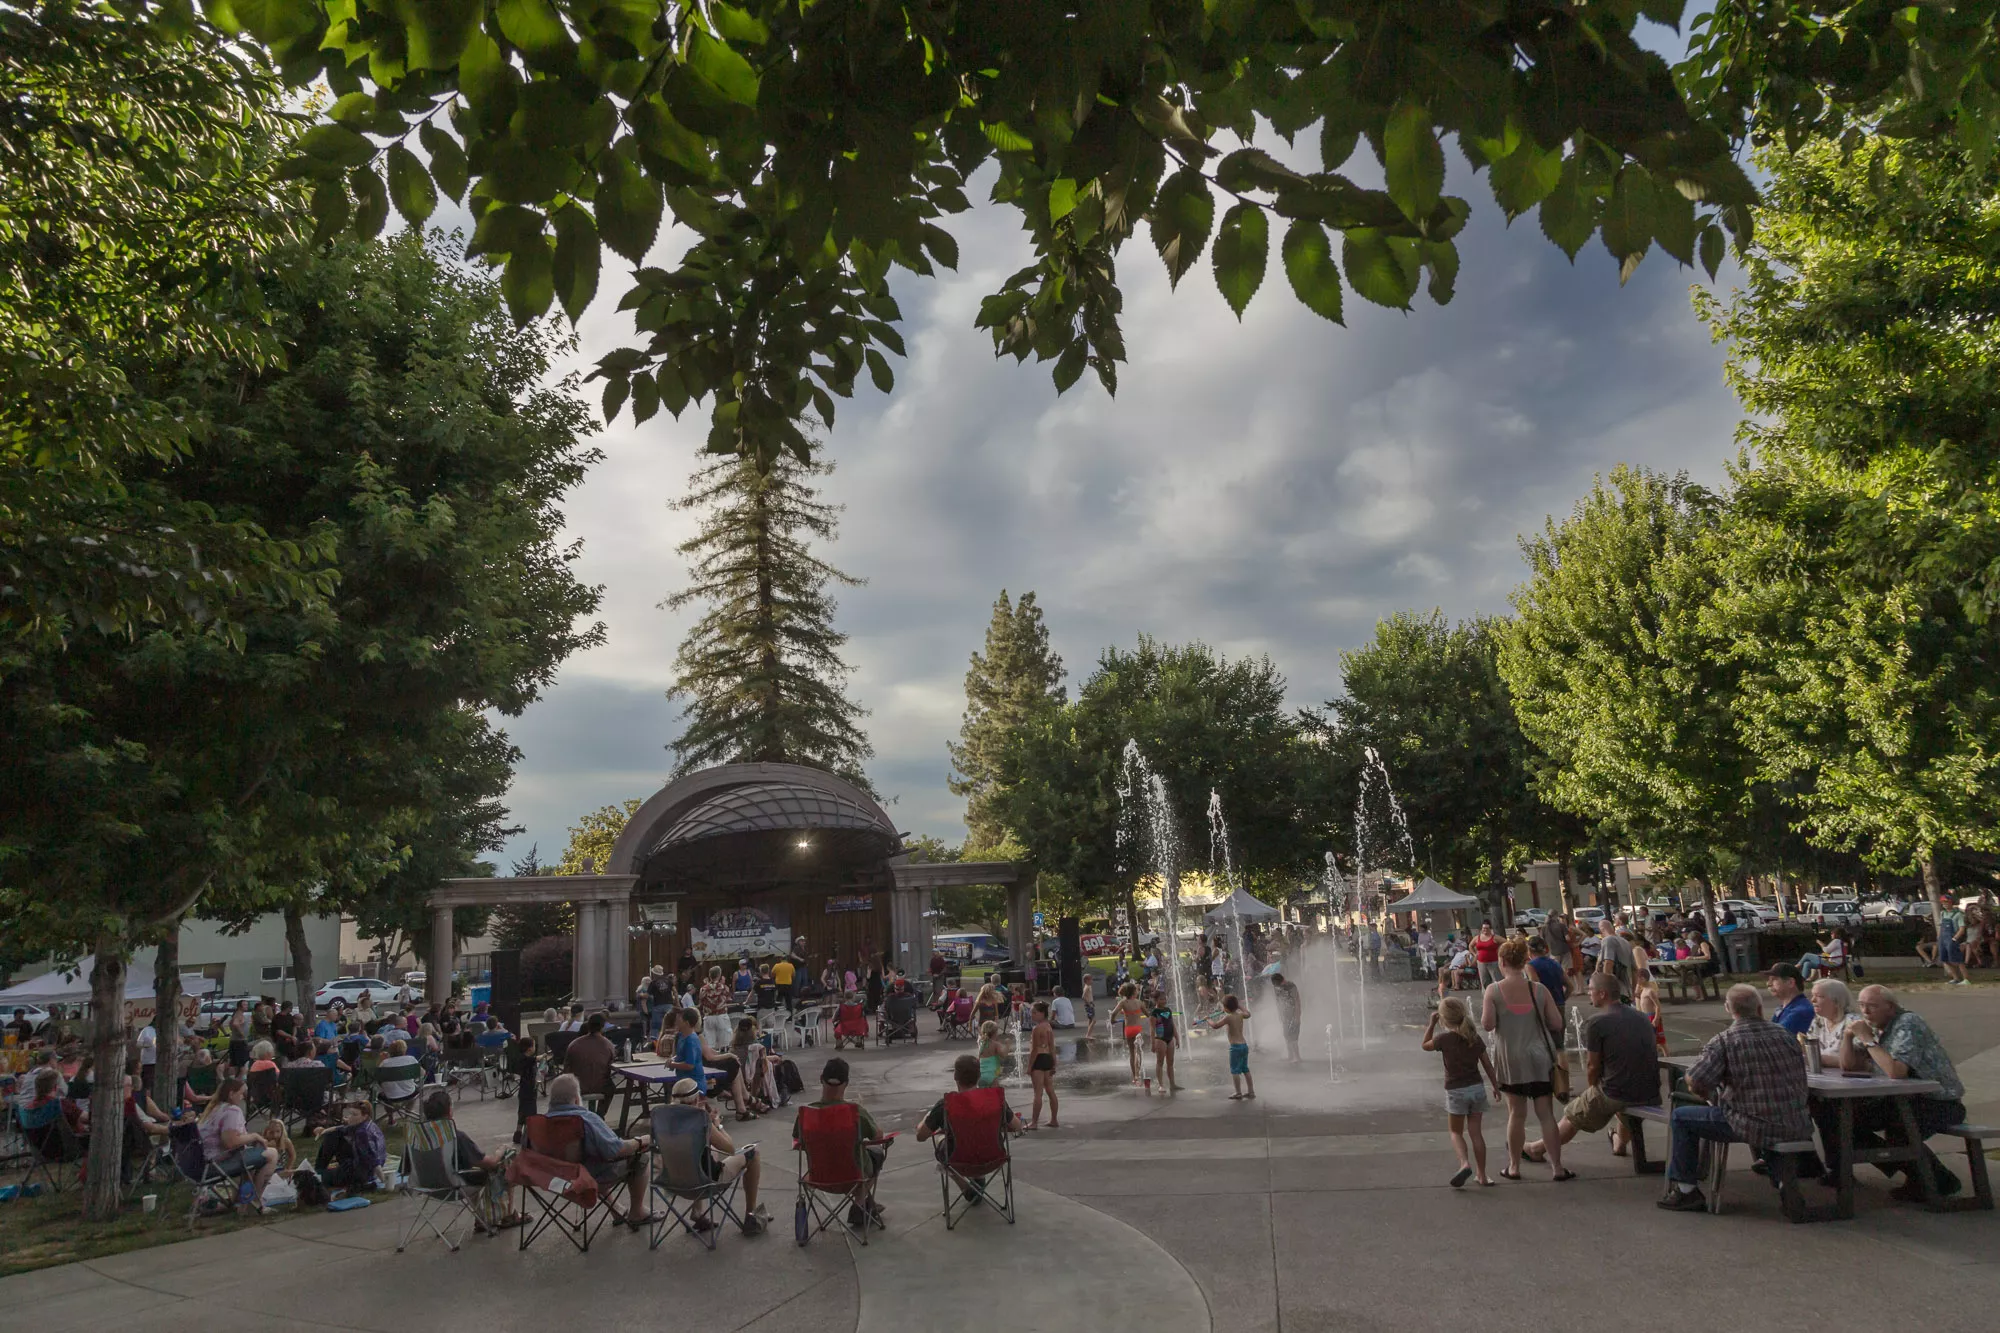 A view of the plaza as the Blue Merles perform during the 2017 Friday Night Concert series in Plaza Park, downtown Chico.